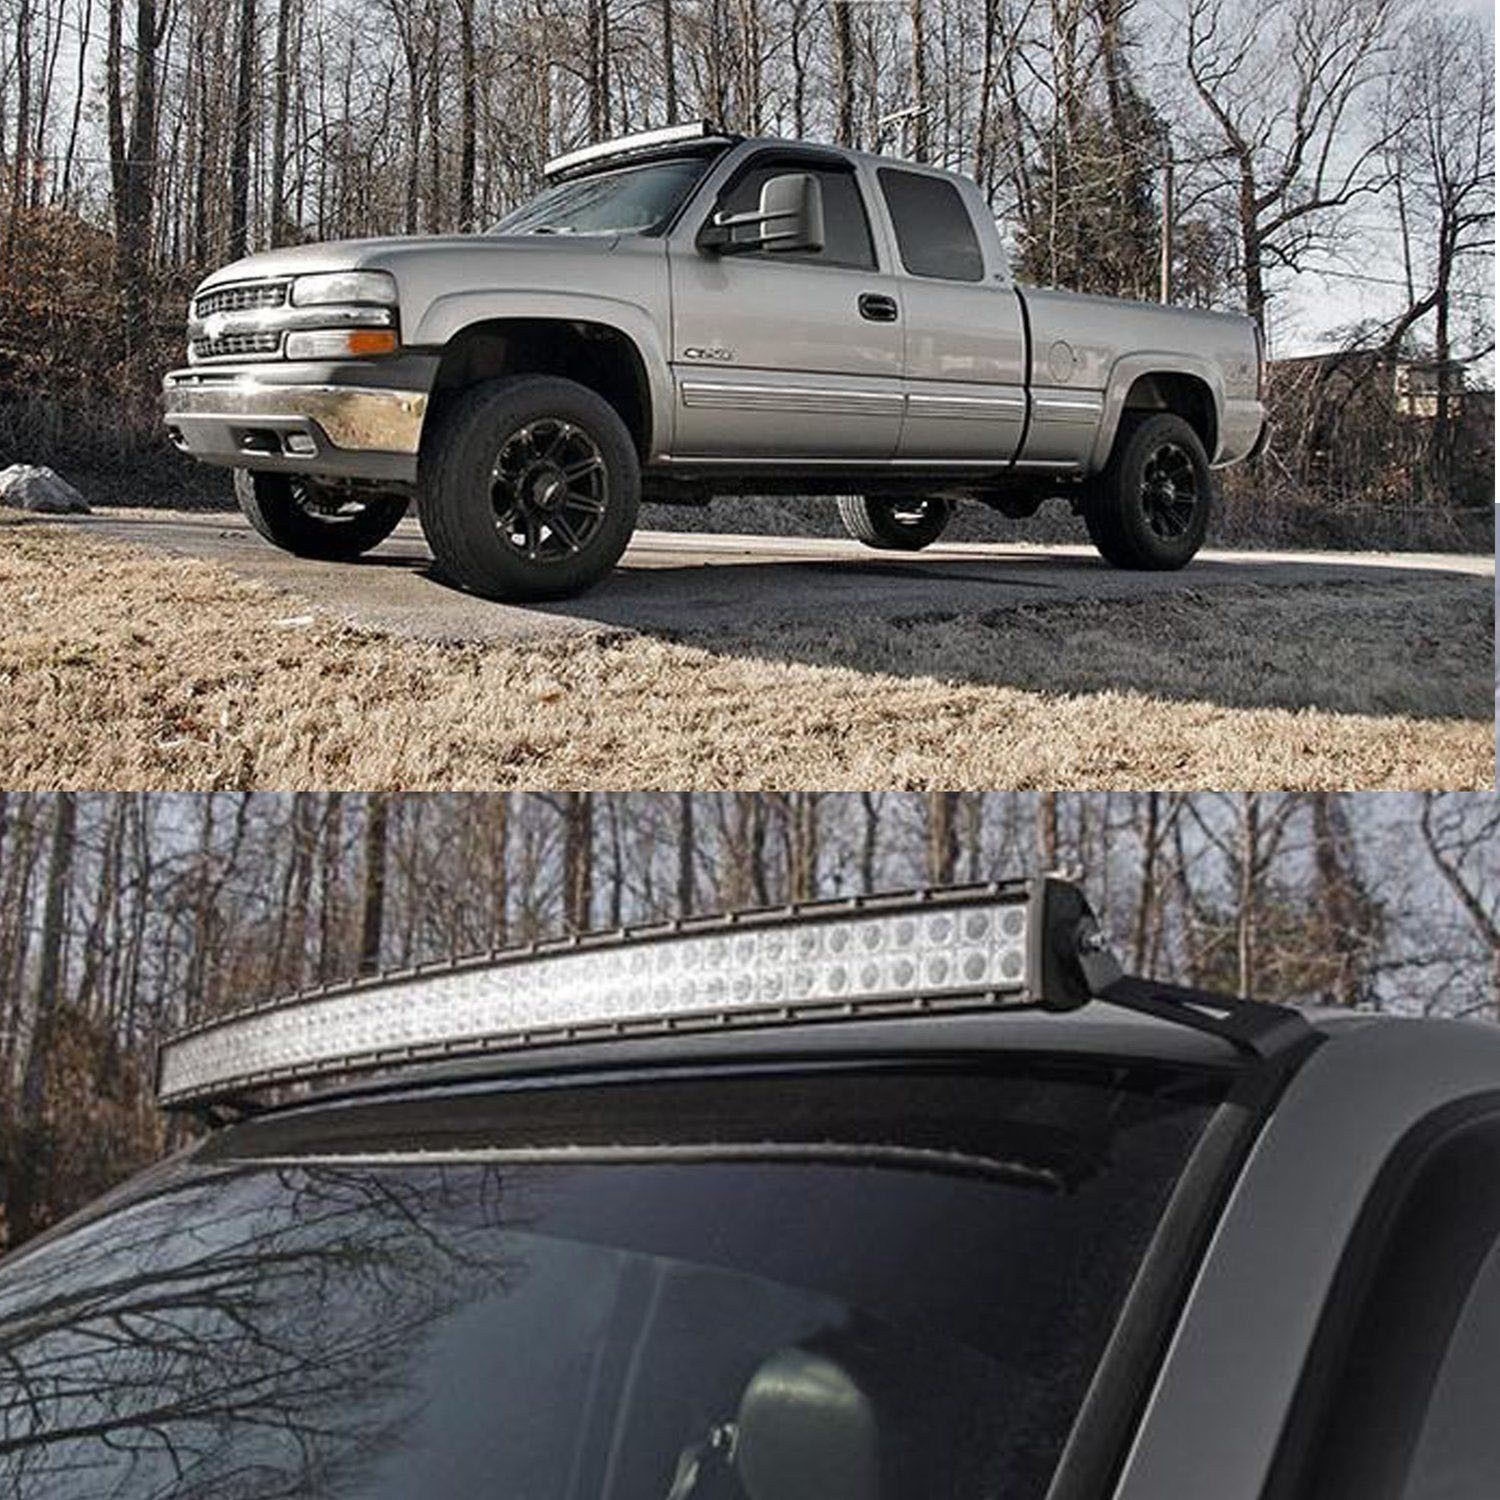 52″ 700W CURVED LED LIGHT BAR COMBO Beam OFF-ROAD DRIVING Lights for 4WD SUV + FREE WIRING KIT